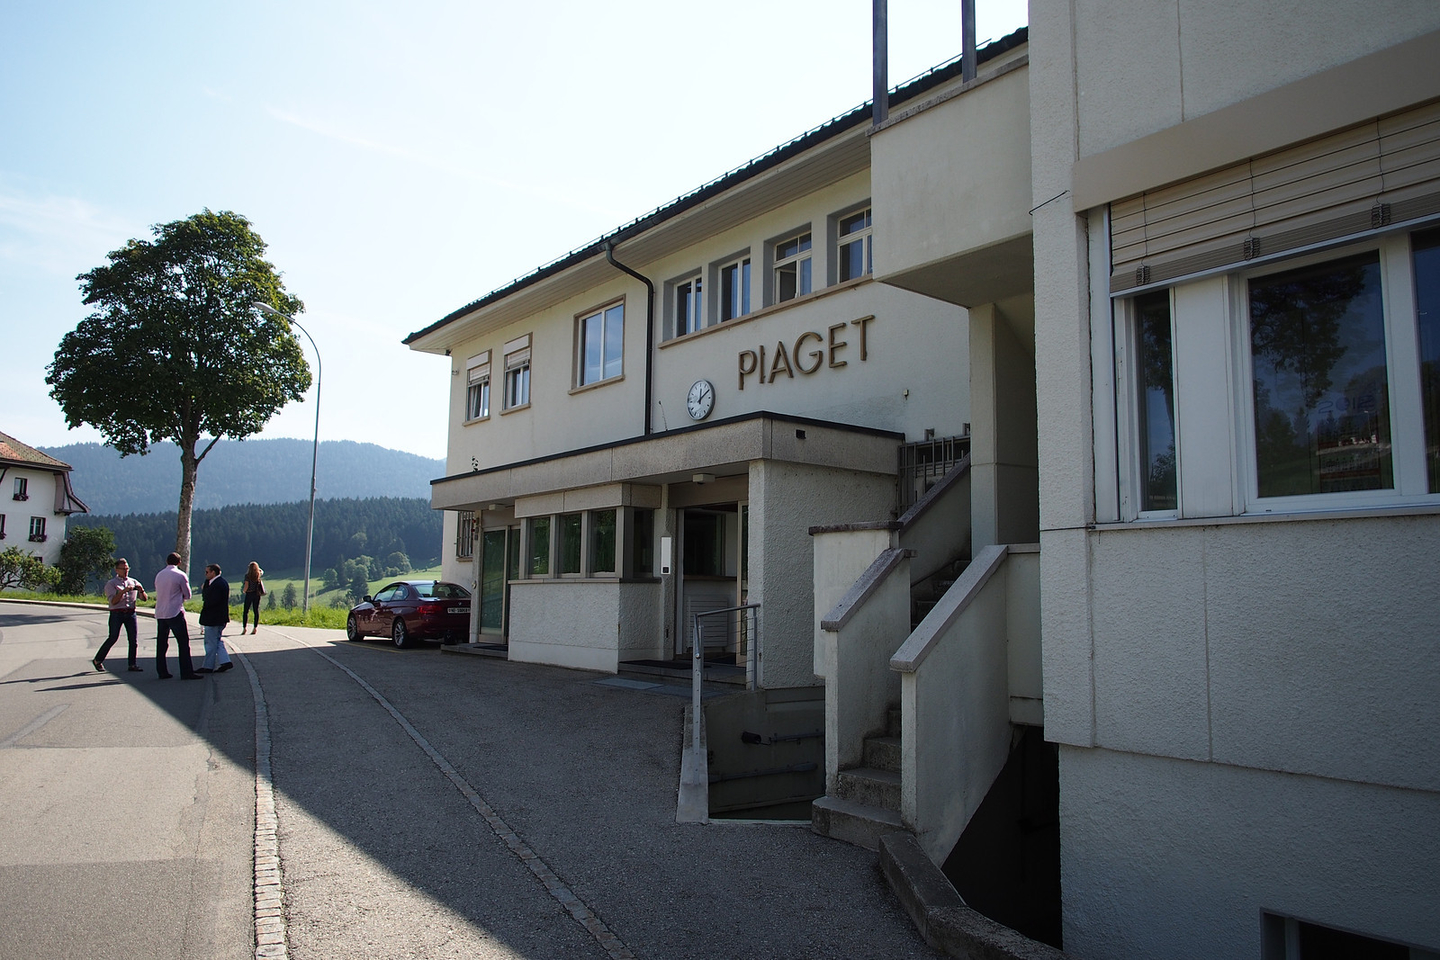 A Tour of both of Piaget’s Manufactures